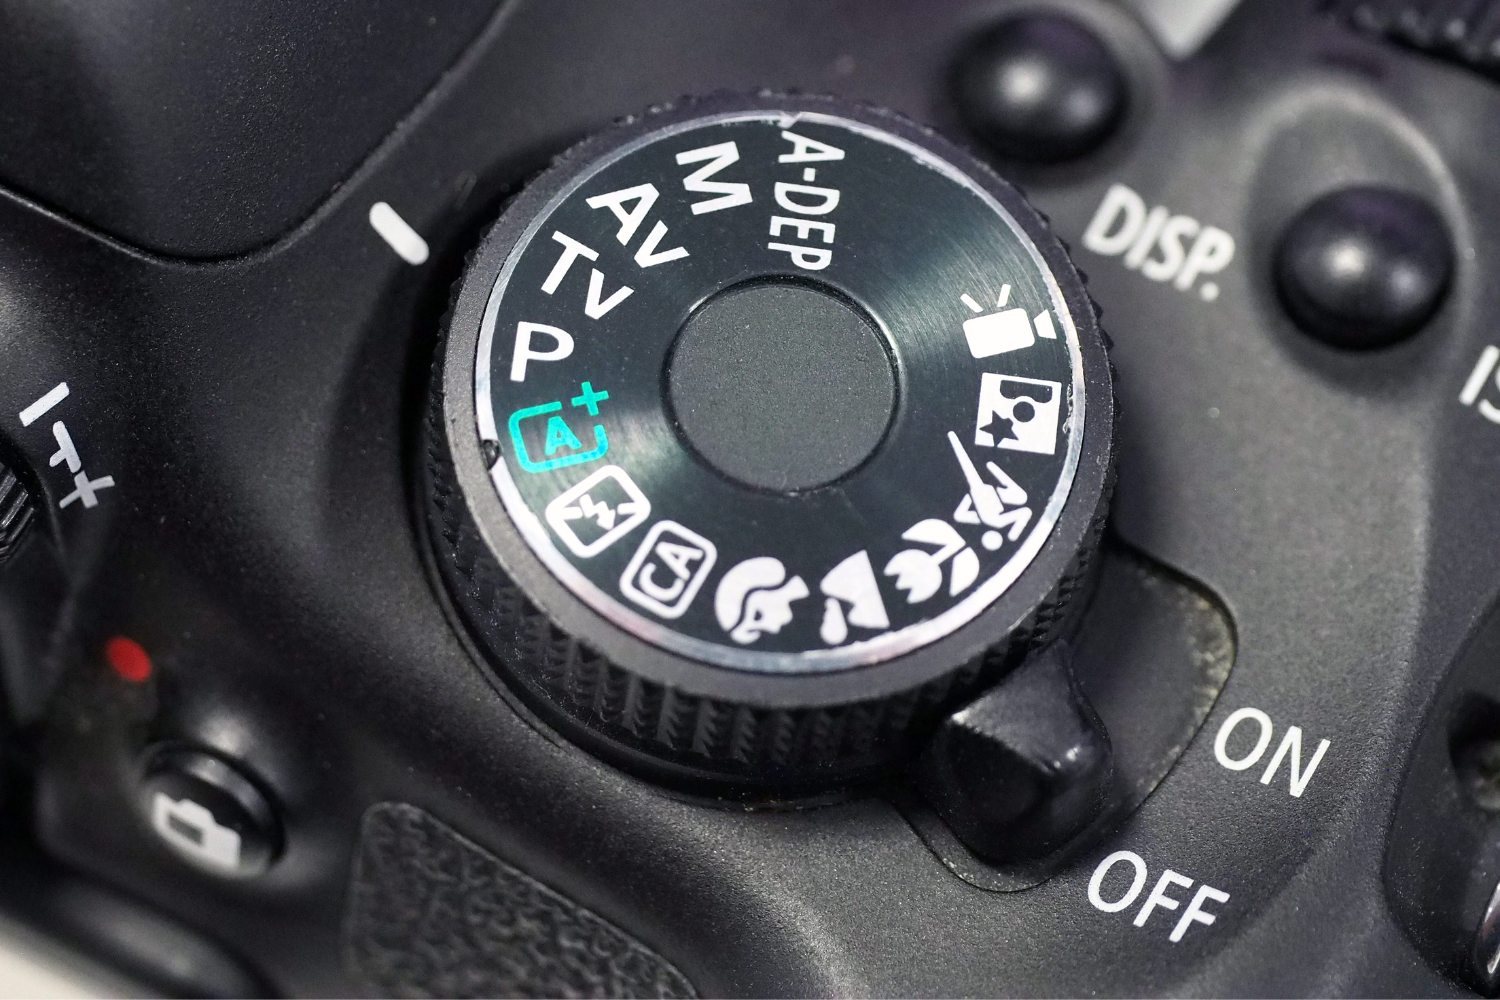 What Are The Different Modes On A DSLR Camera